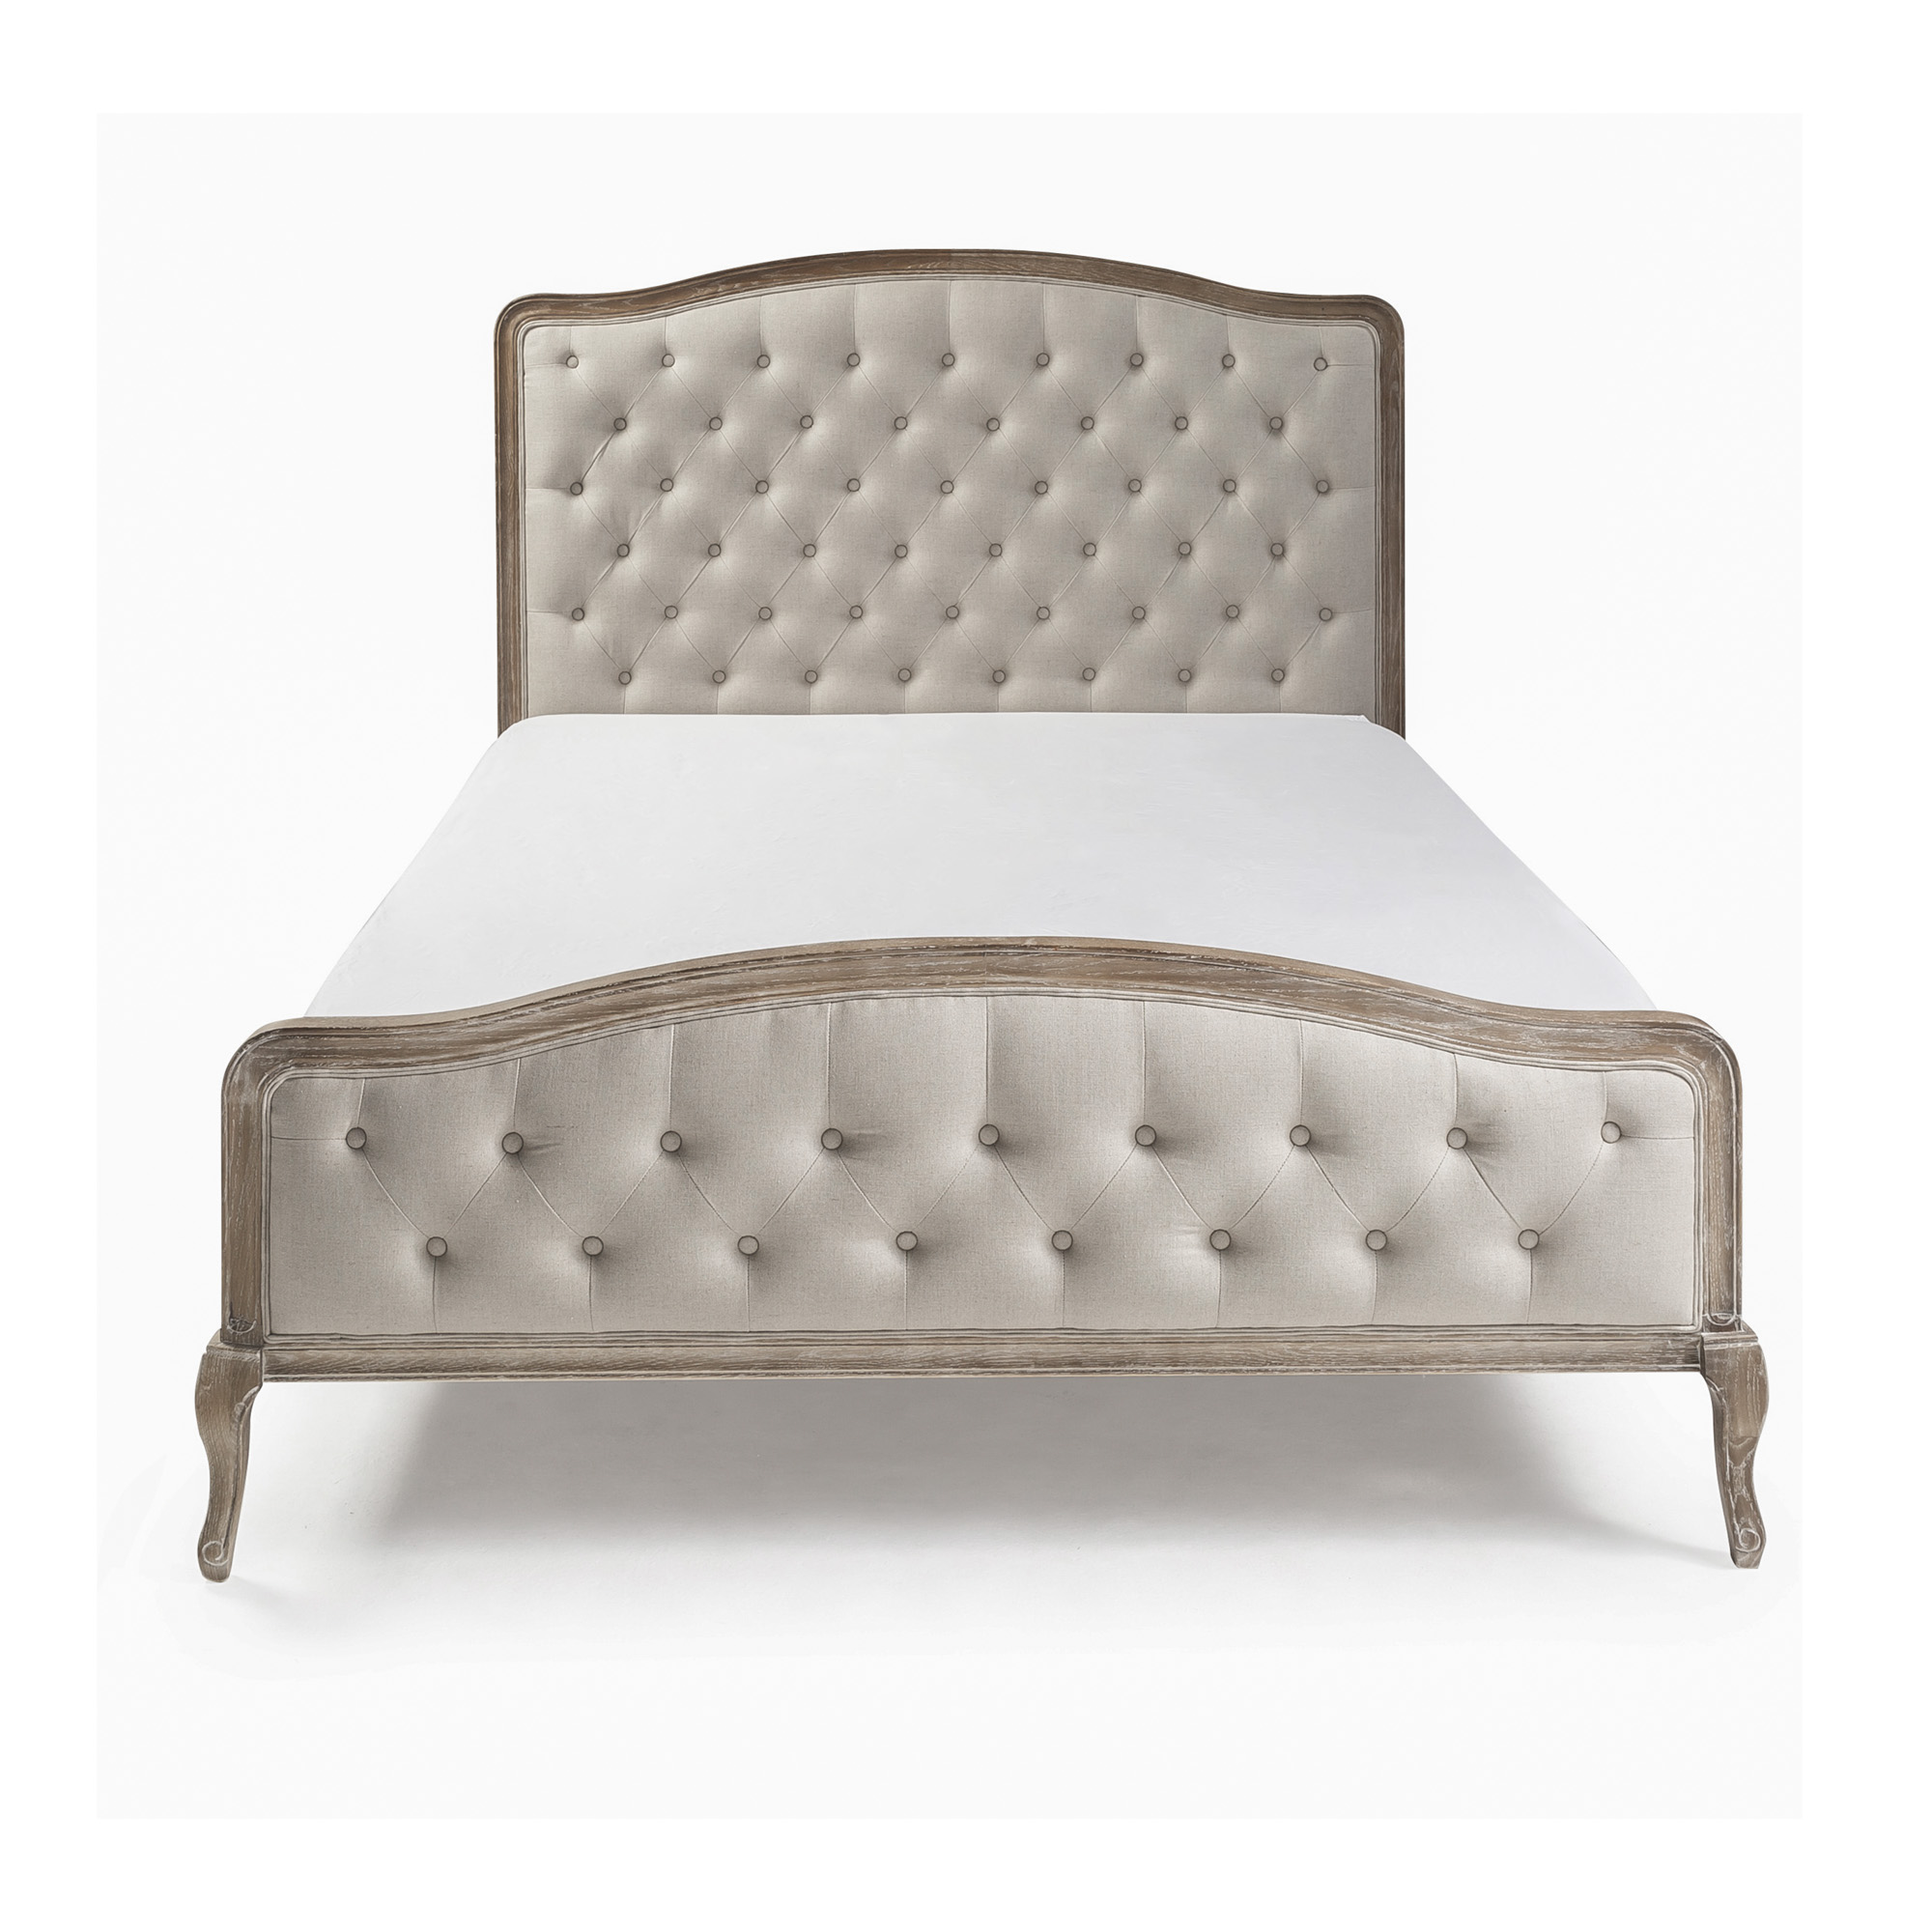 Arielle French Weathered Limed Ash Buttoned Upholstered High Foot Board Bed – Double Size